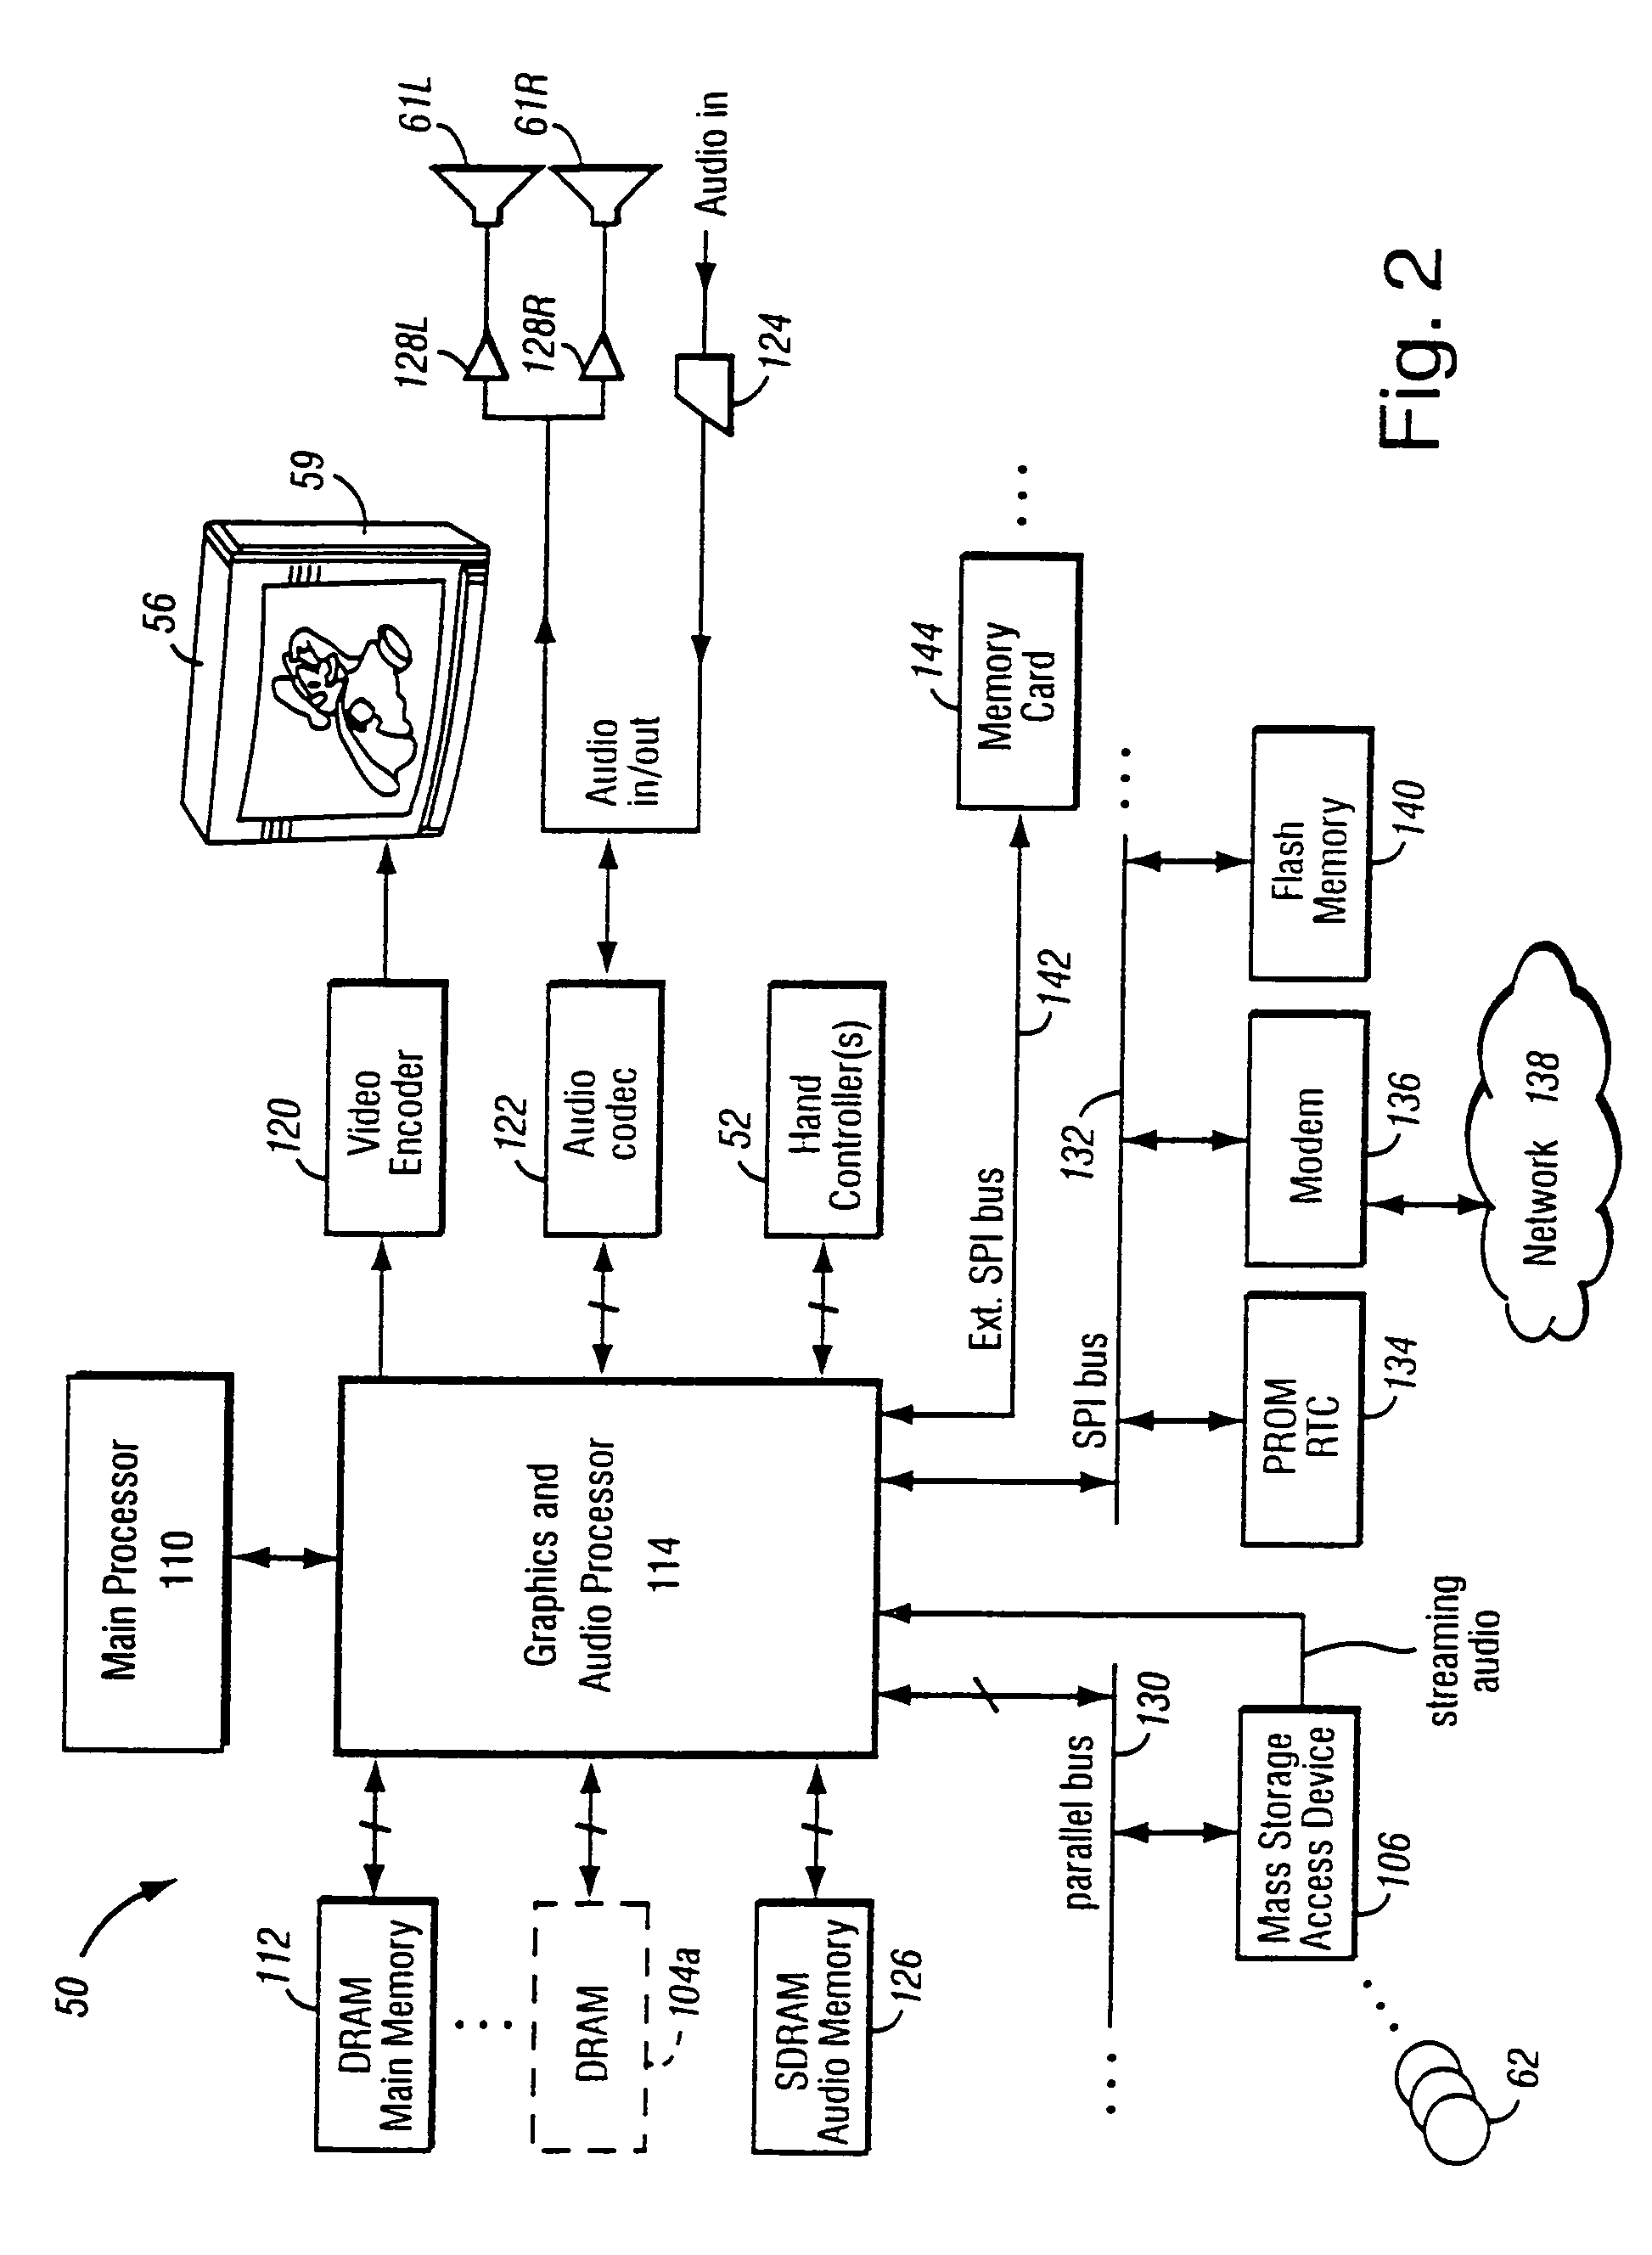 Peripheral devices for a video game system